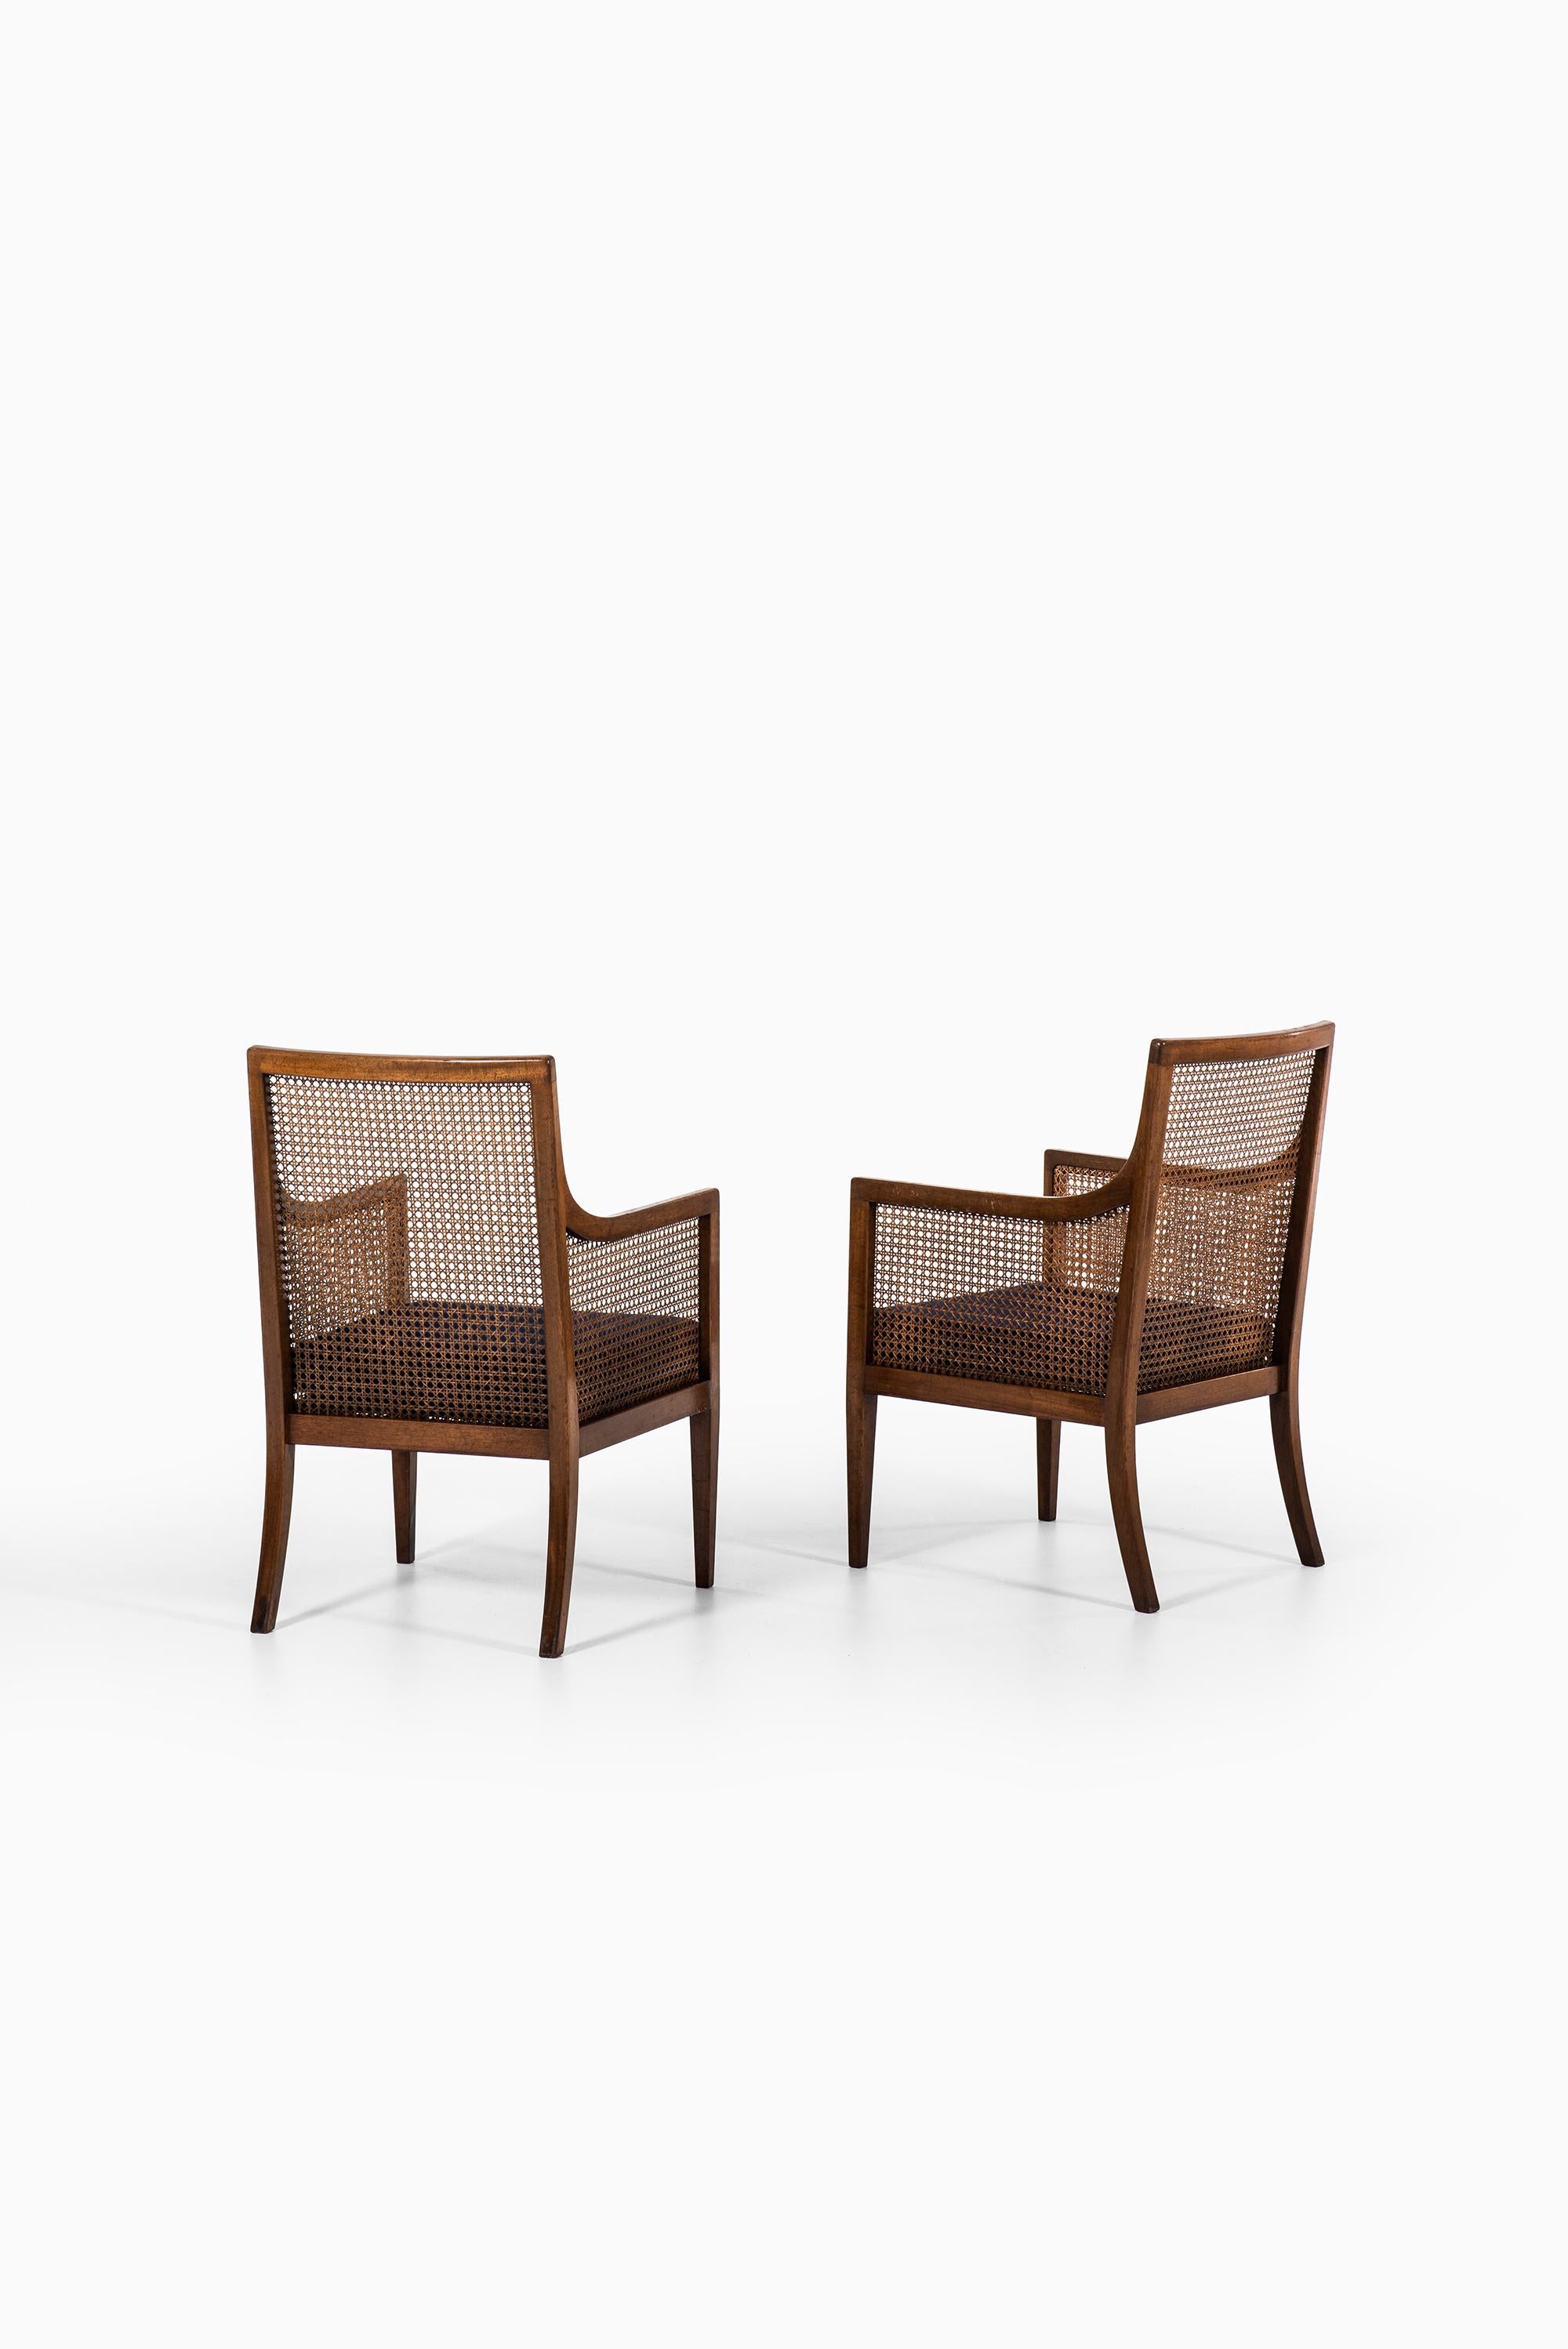 Mid-20th Century Bergère Easy Chairs by Lysberg Hansen & Therp in Denmark